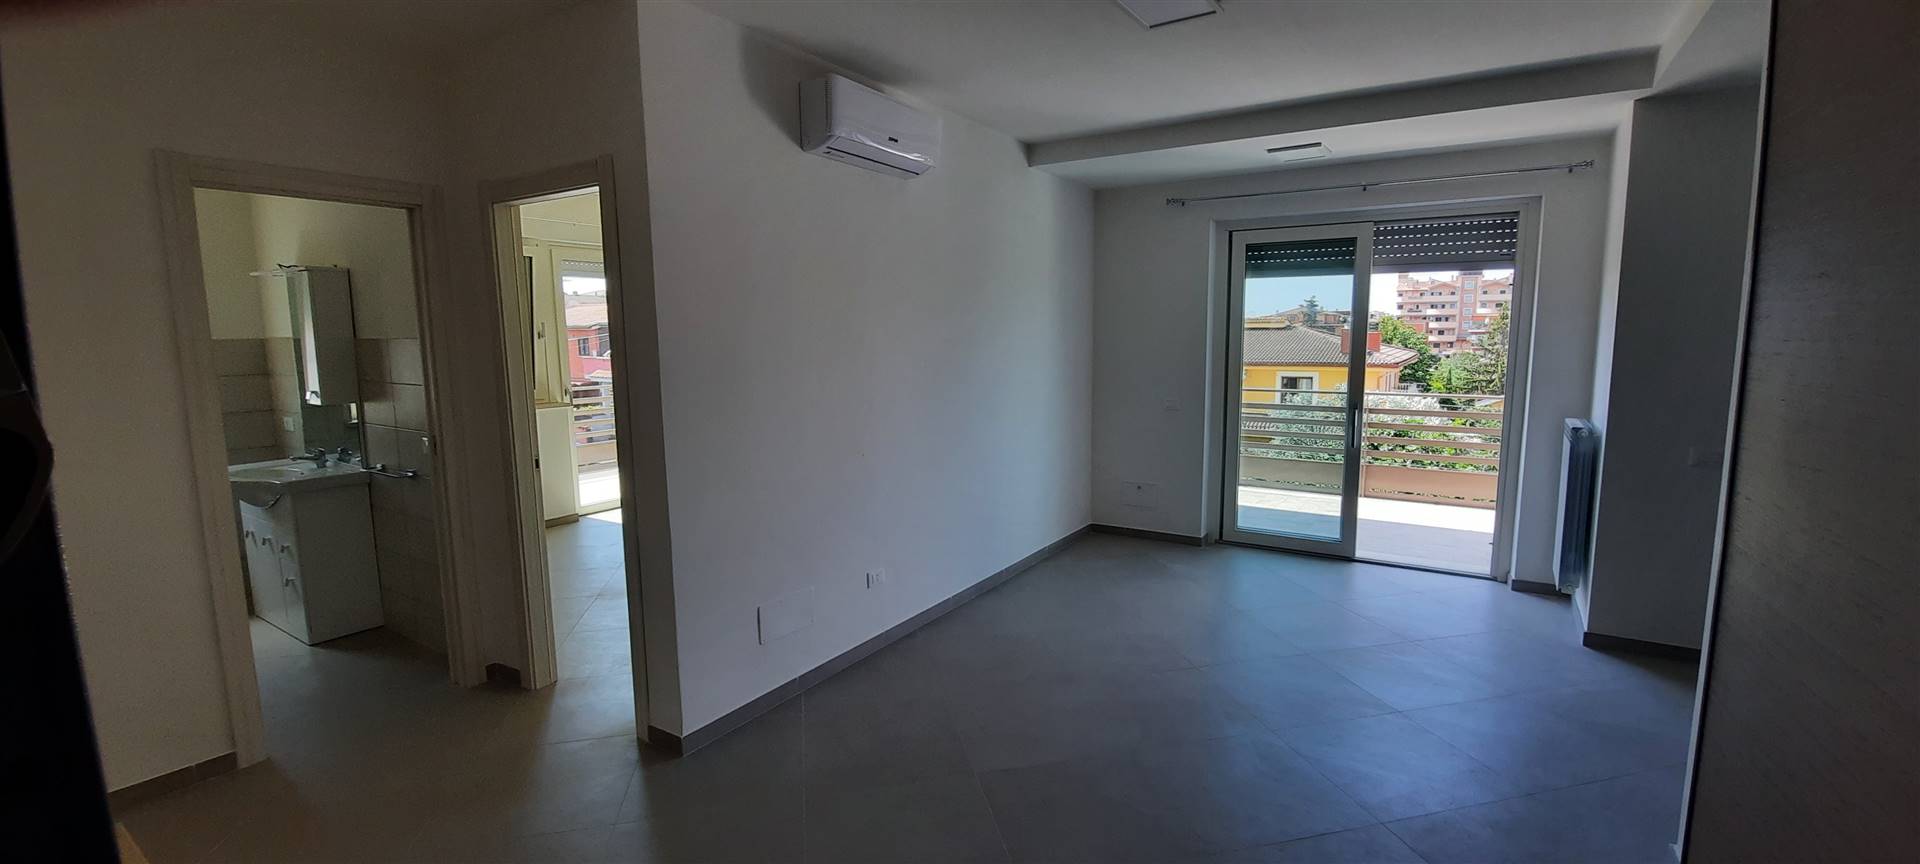 SELVA CANDIDA, ROMA, Apartment for rent of 60 Sq. mt., New construction, Heating Individual heating system, Energetic class: A+, Epi: 16,79 kwh/m2 year, placed at 2° on 3, composed by: 3 Rooms, 